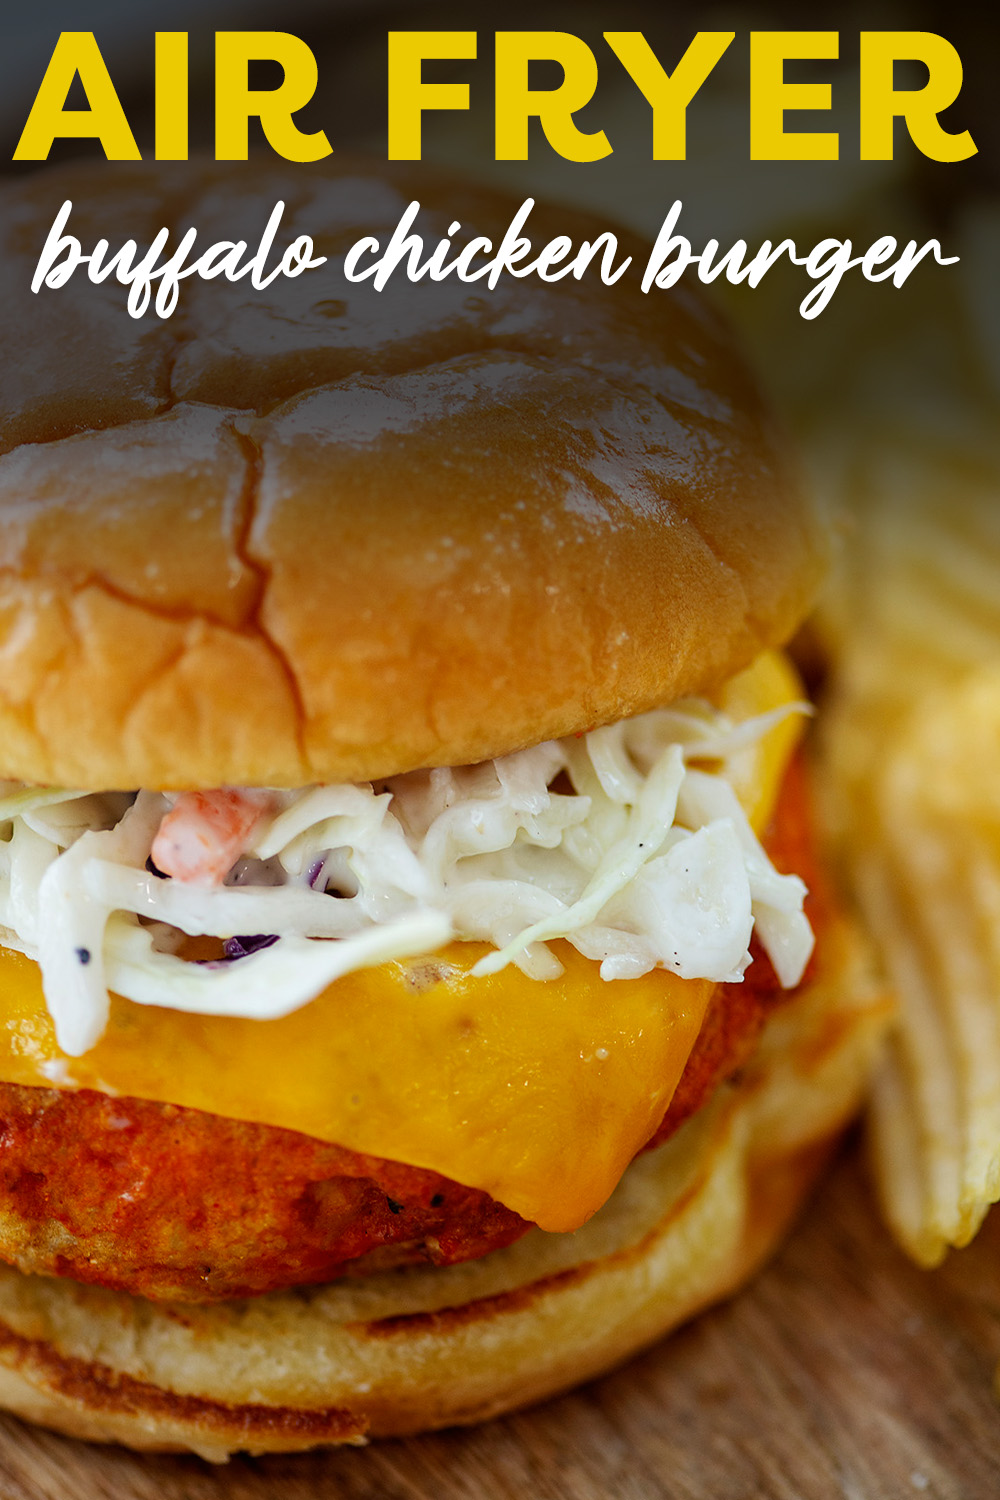 This buffalo chicken burger can be customized to your preferred heat level!  And the texture is great coming from the air fryer!